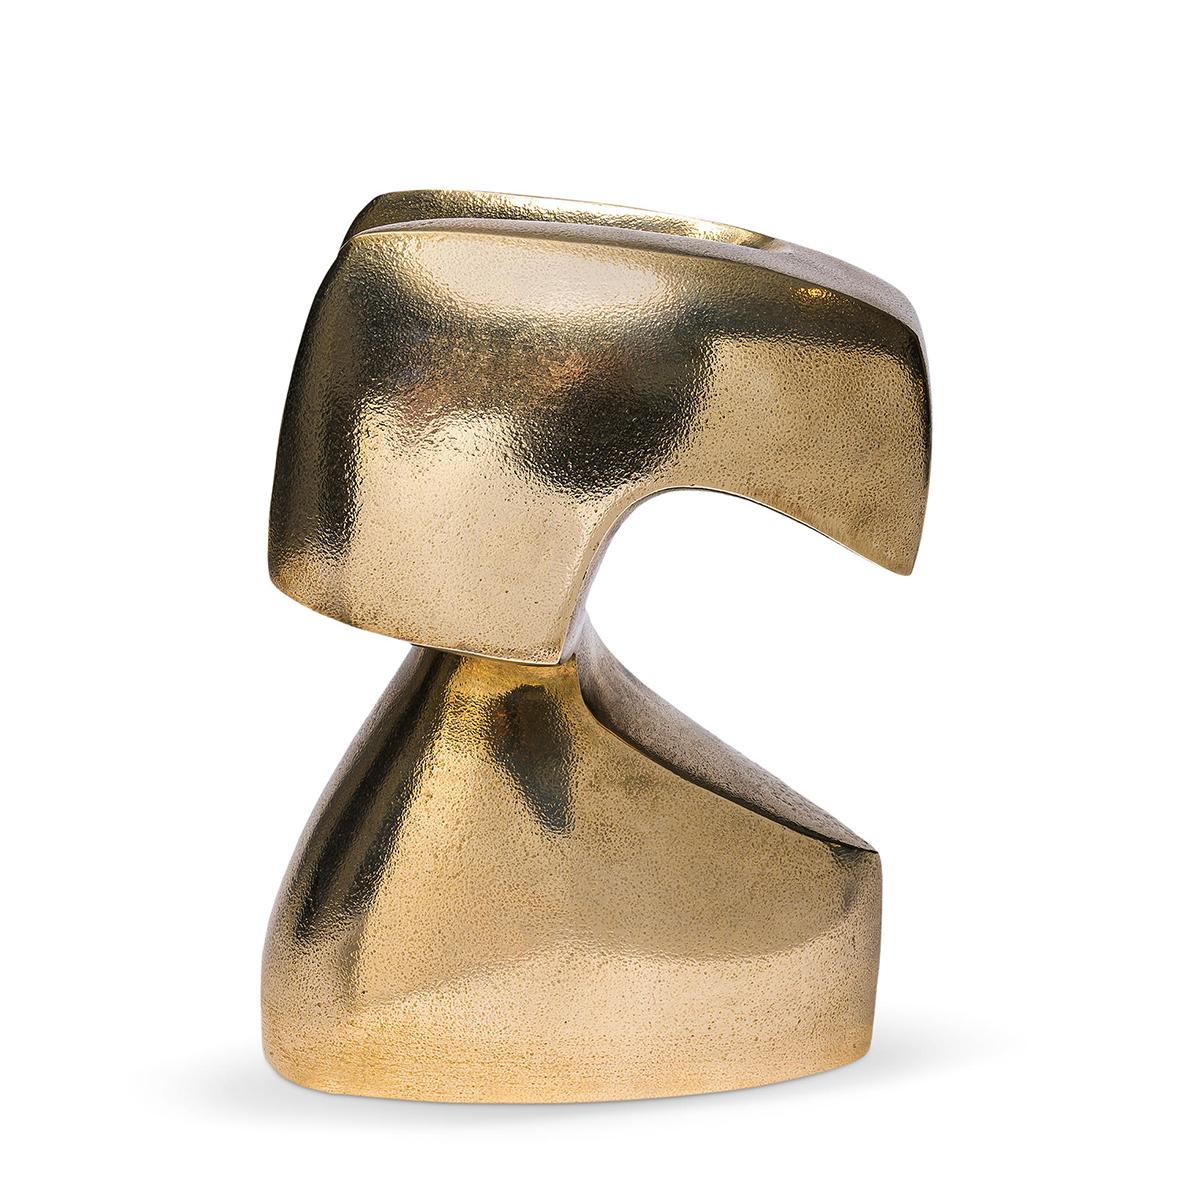 Sculpture Elliot Polished Bronze all in solid 
bronze in polished finish.
Also available in green bronze finish, price 5250,00€.